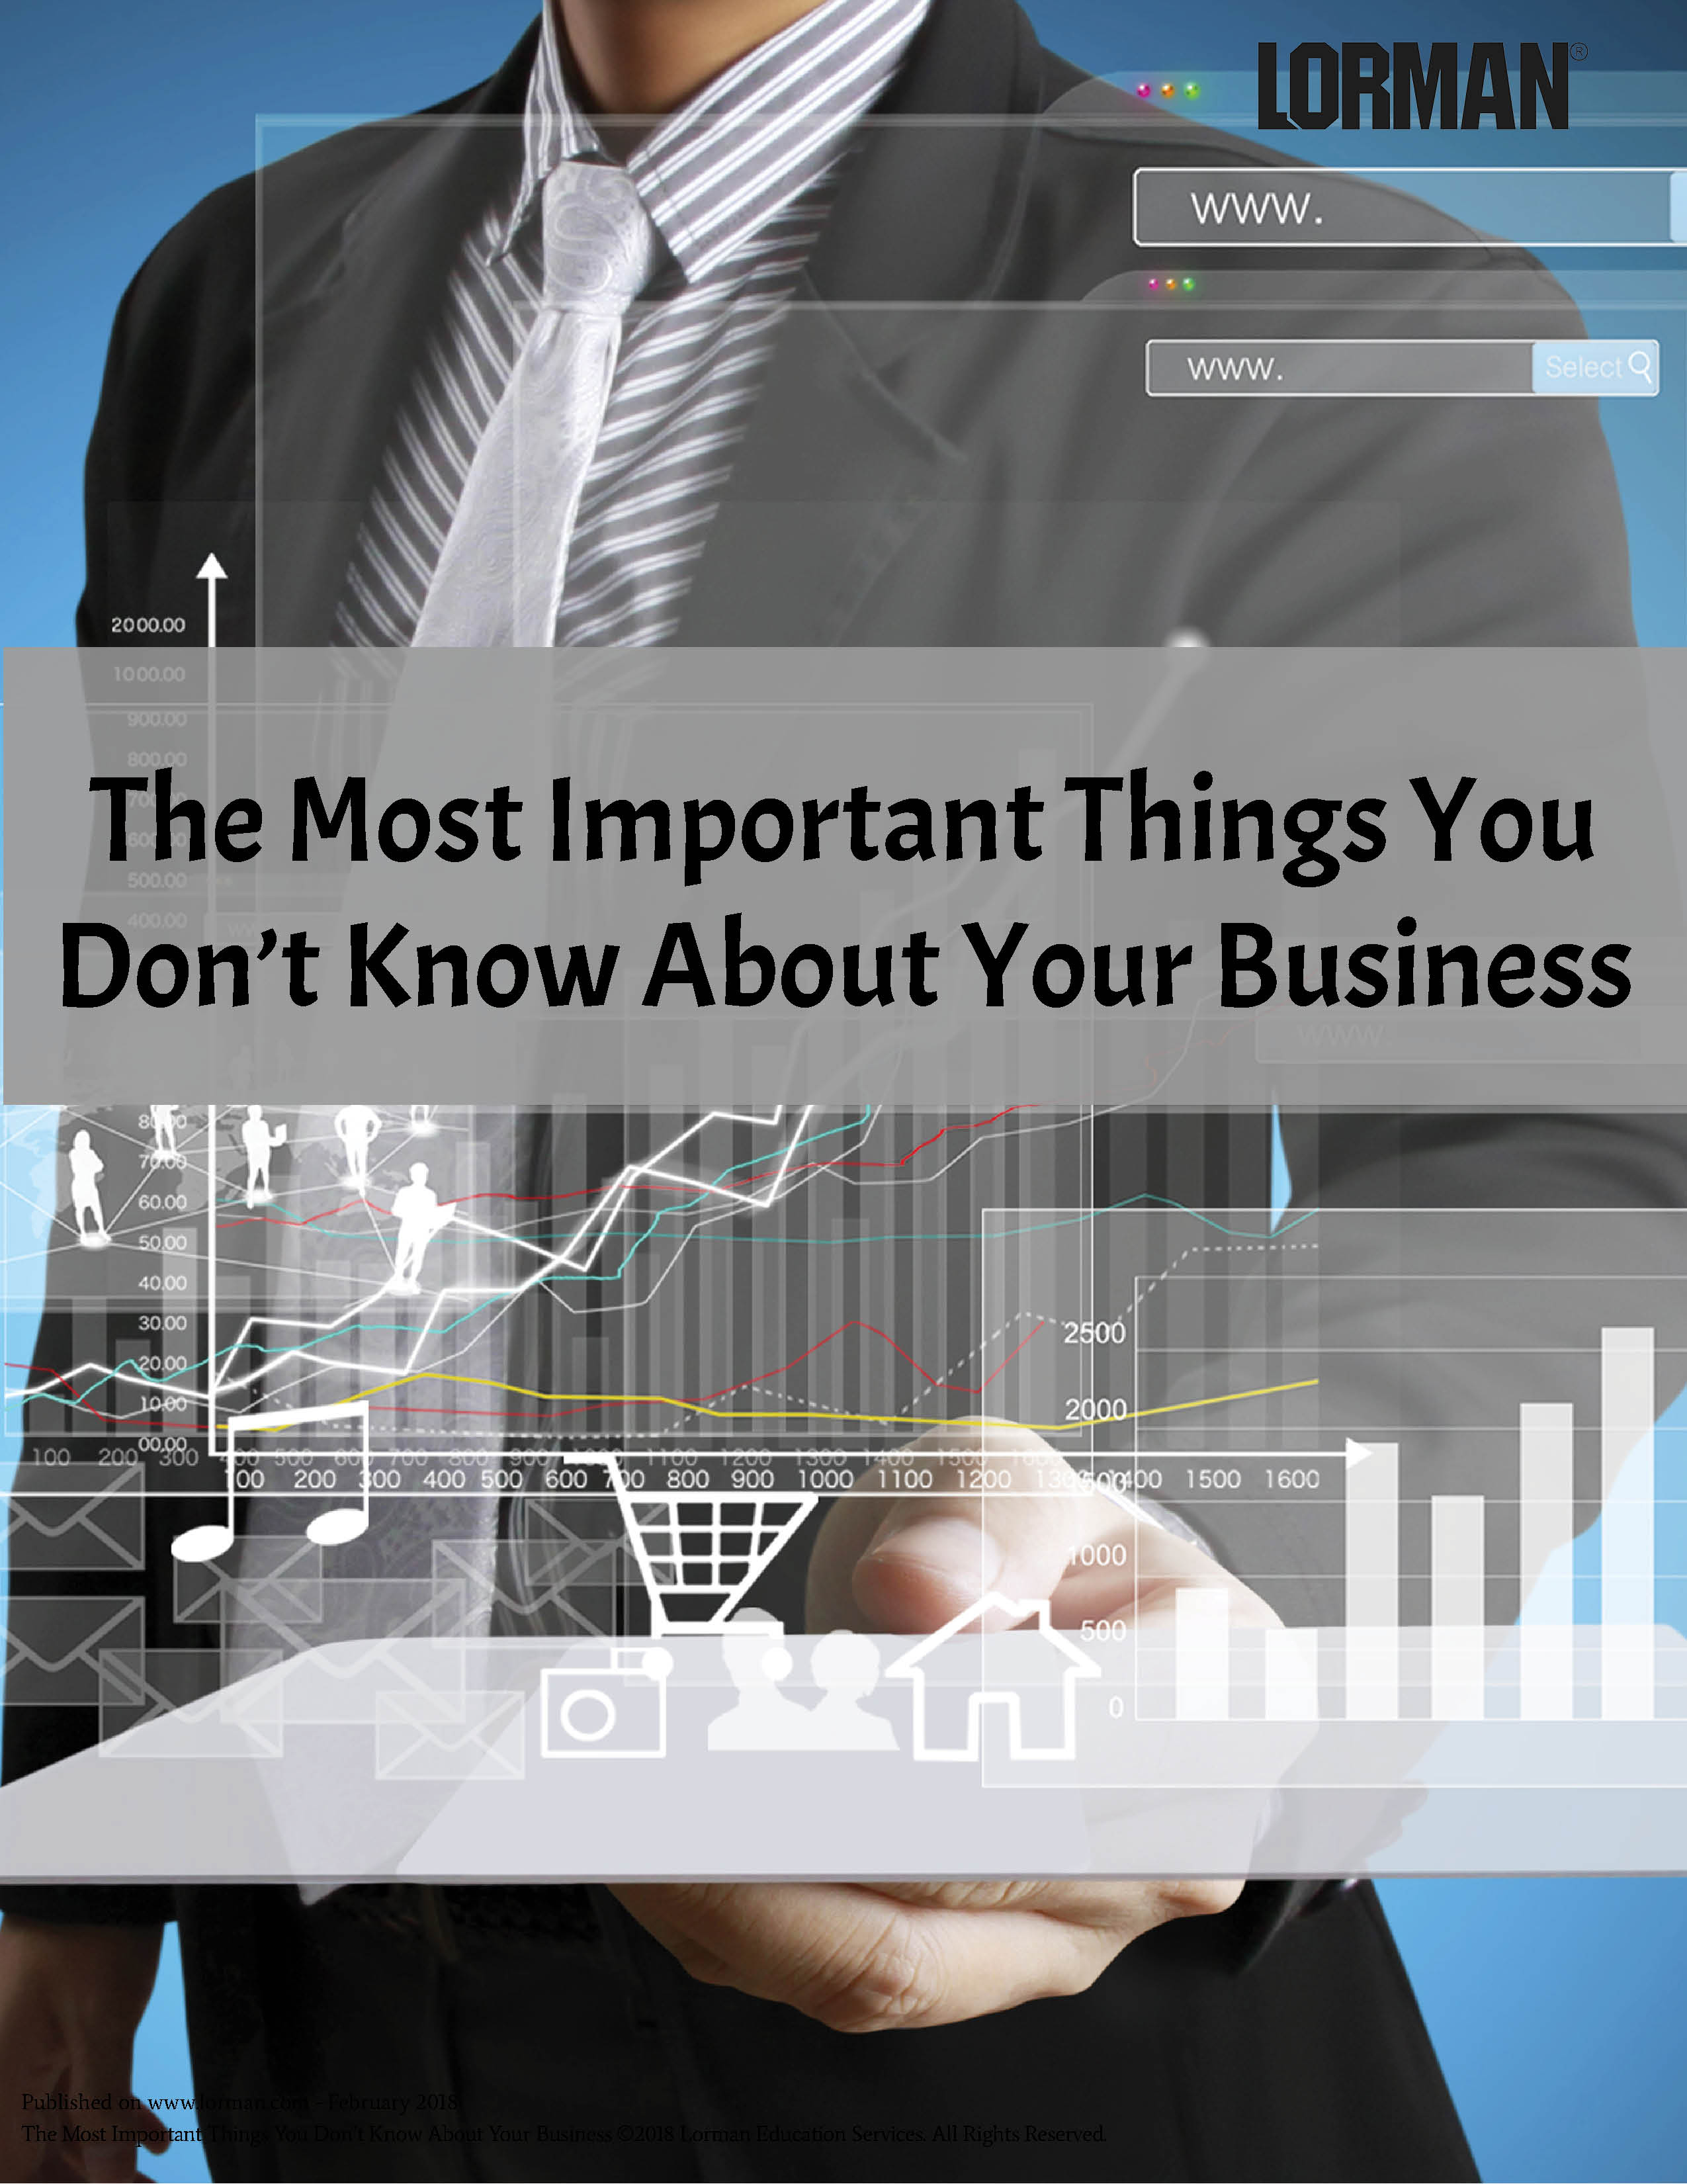 The Most Important Things You Don’t Know About Your Business